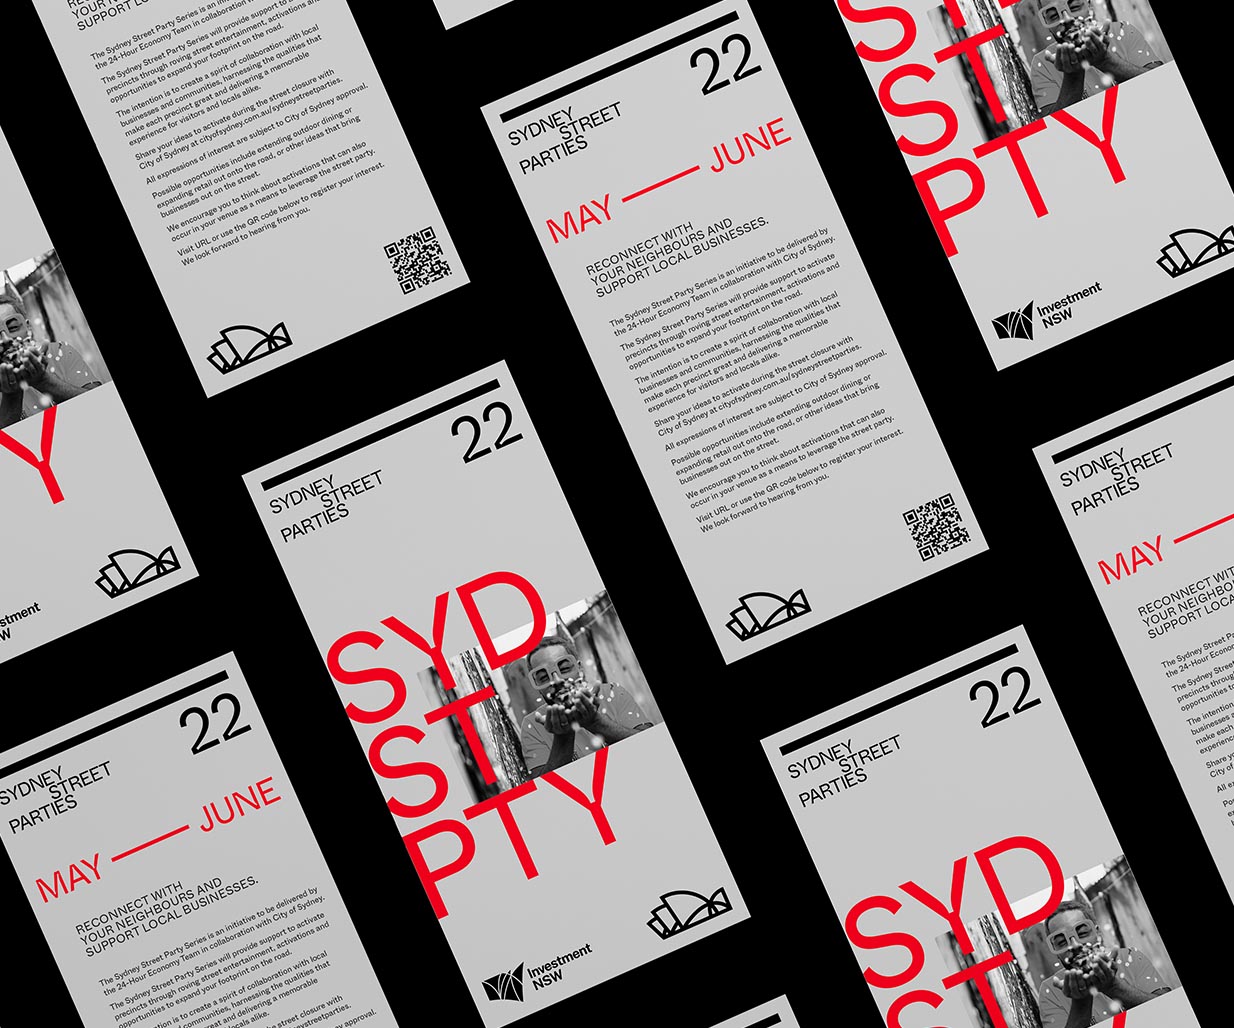 Branding Services for Sydney Street Party, where Percept were among the Branding Agencies selected for this design pitch, image C